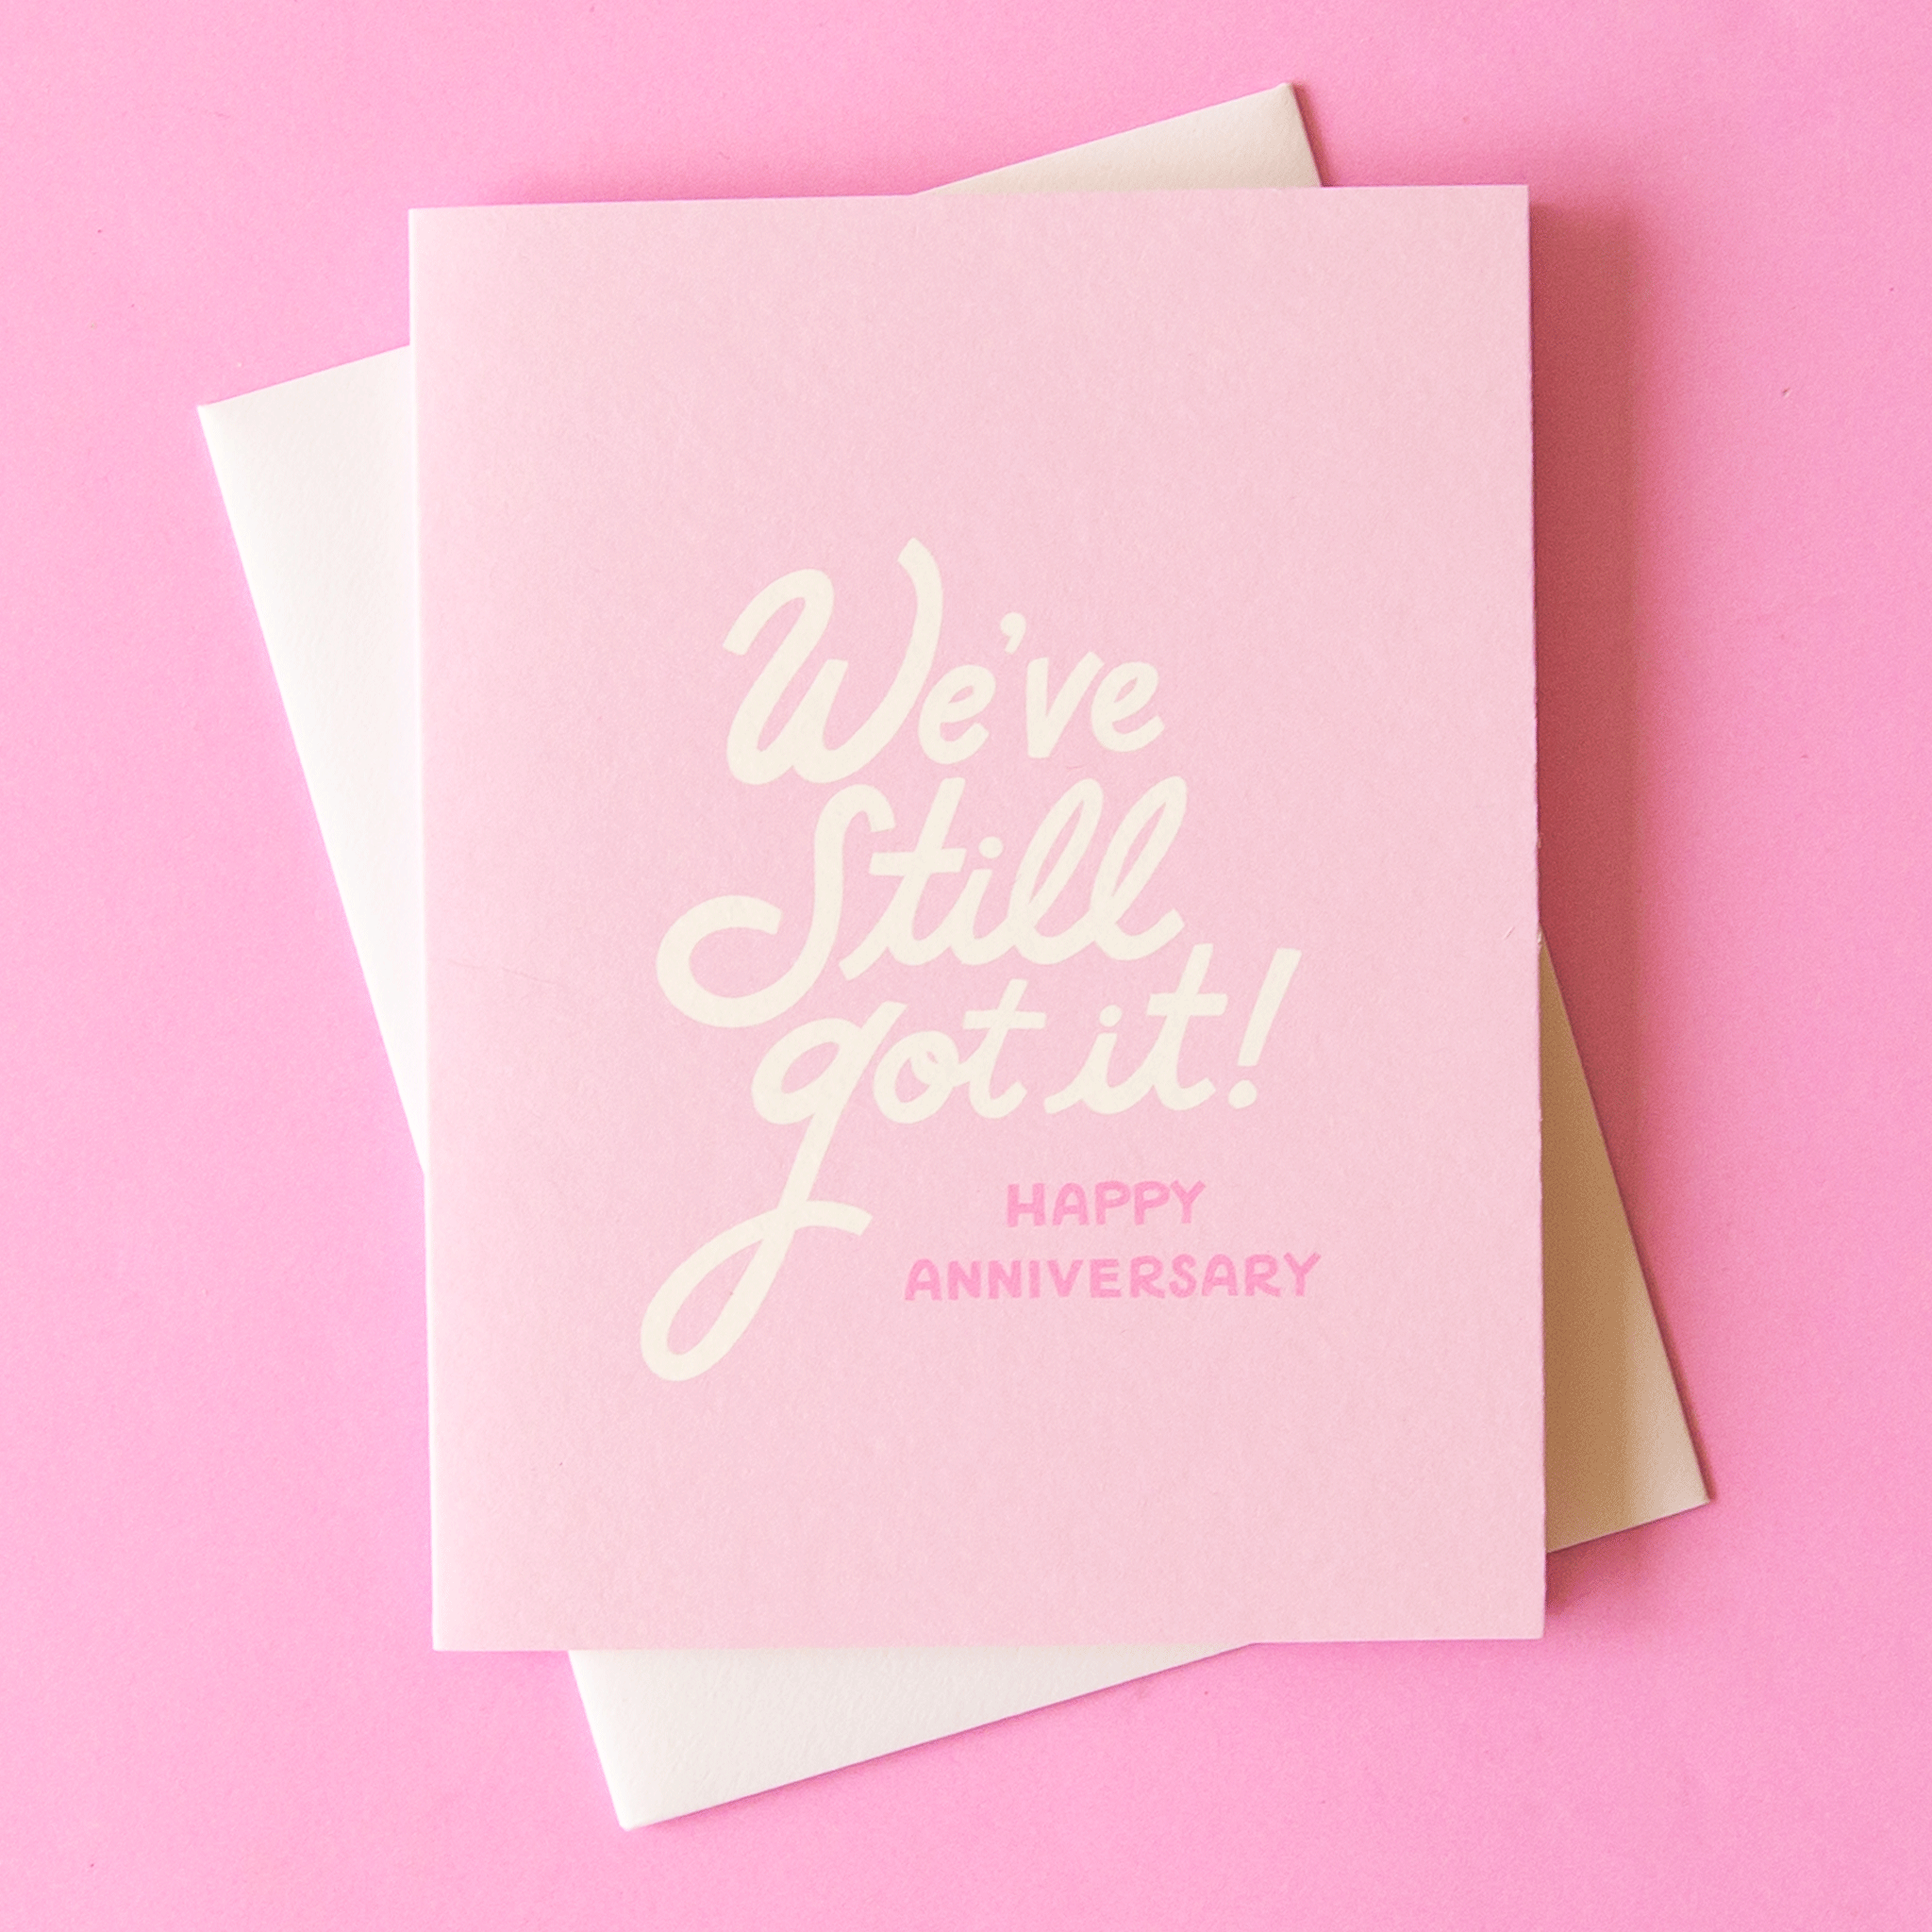 On a pink background is a light pink card with white text that reads, "We've Still Got It! Happy Anniversary".